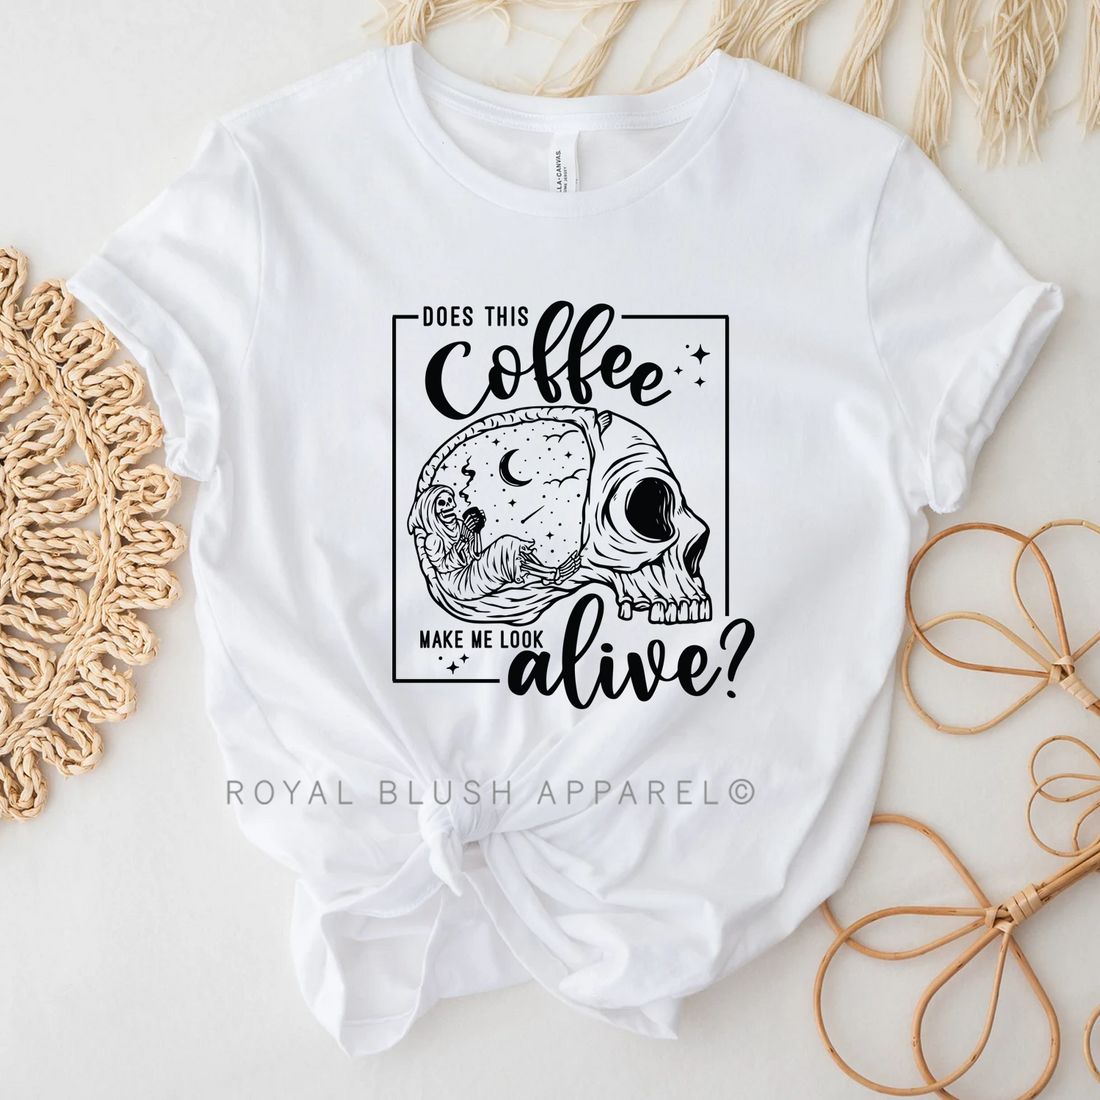 Does This Coffee Make Me Look Alive? Relaxed Unisex T-shirt